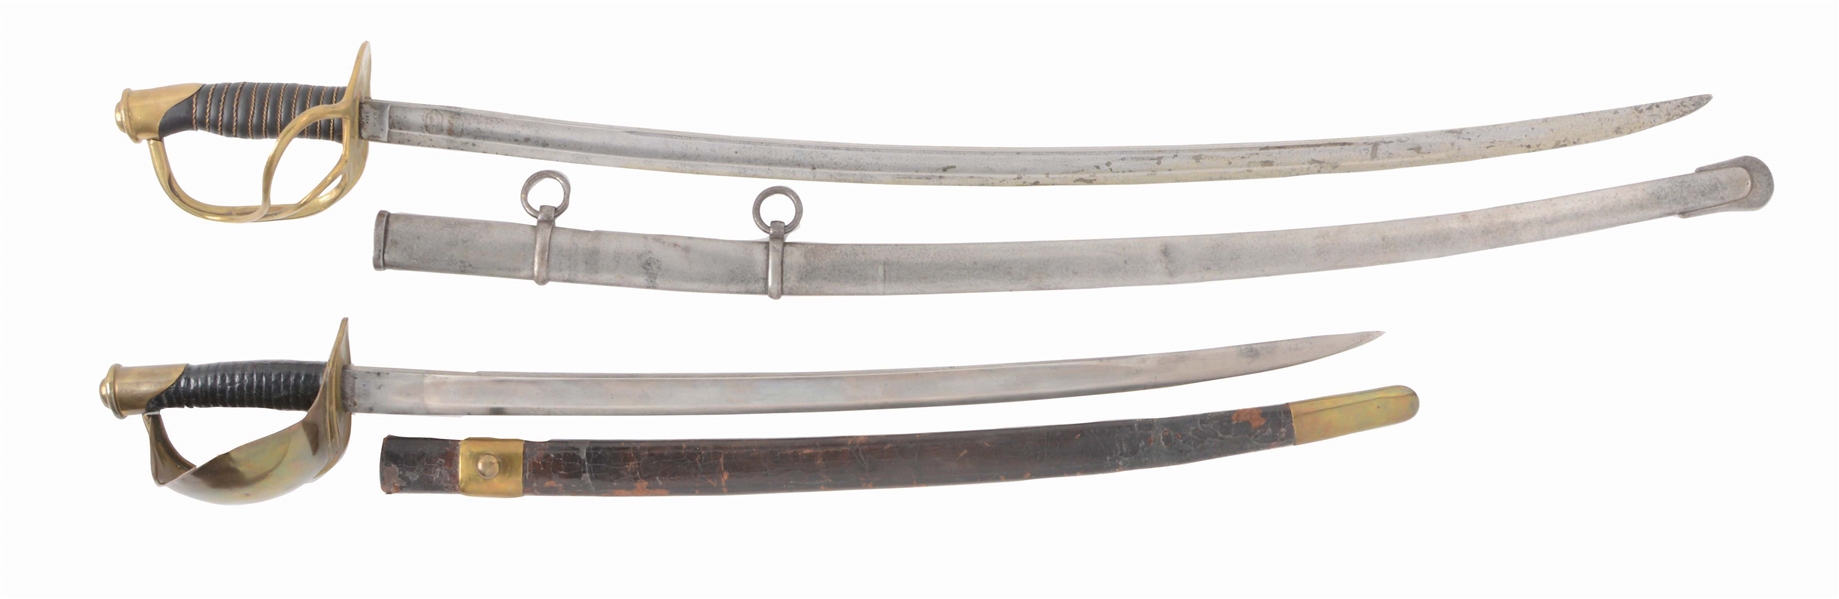 LOT OF TWO: 1860 LIGHT CAVALRY SABER AND 1860 NAVY CUTLASS.